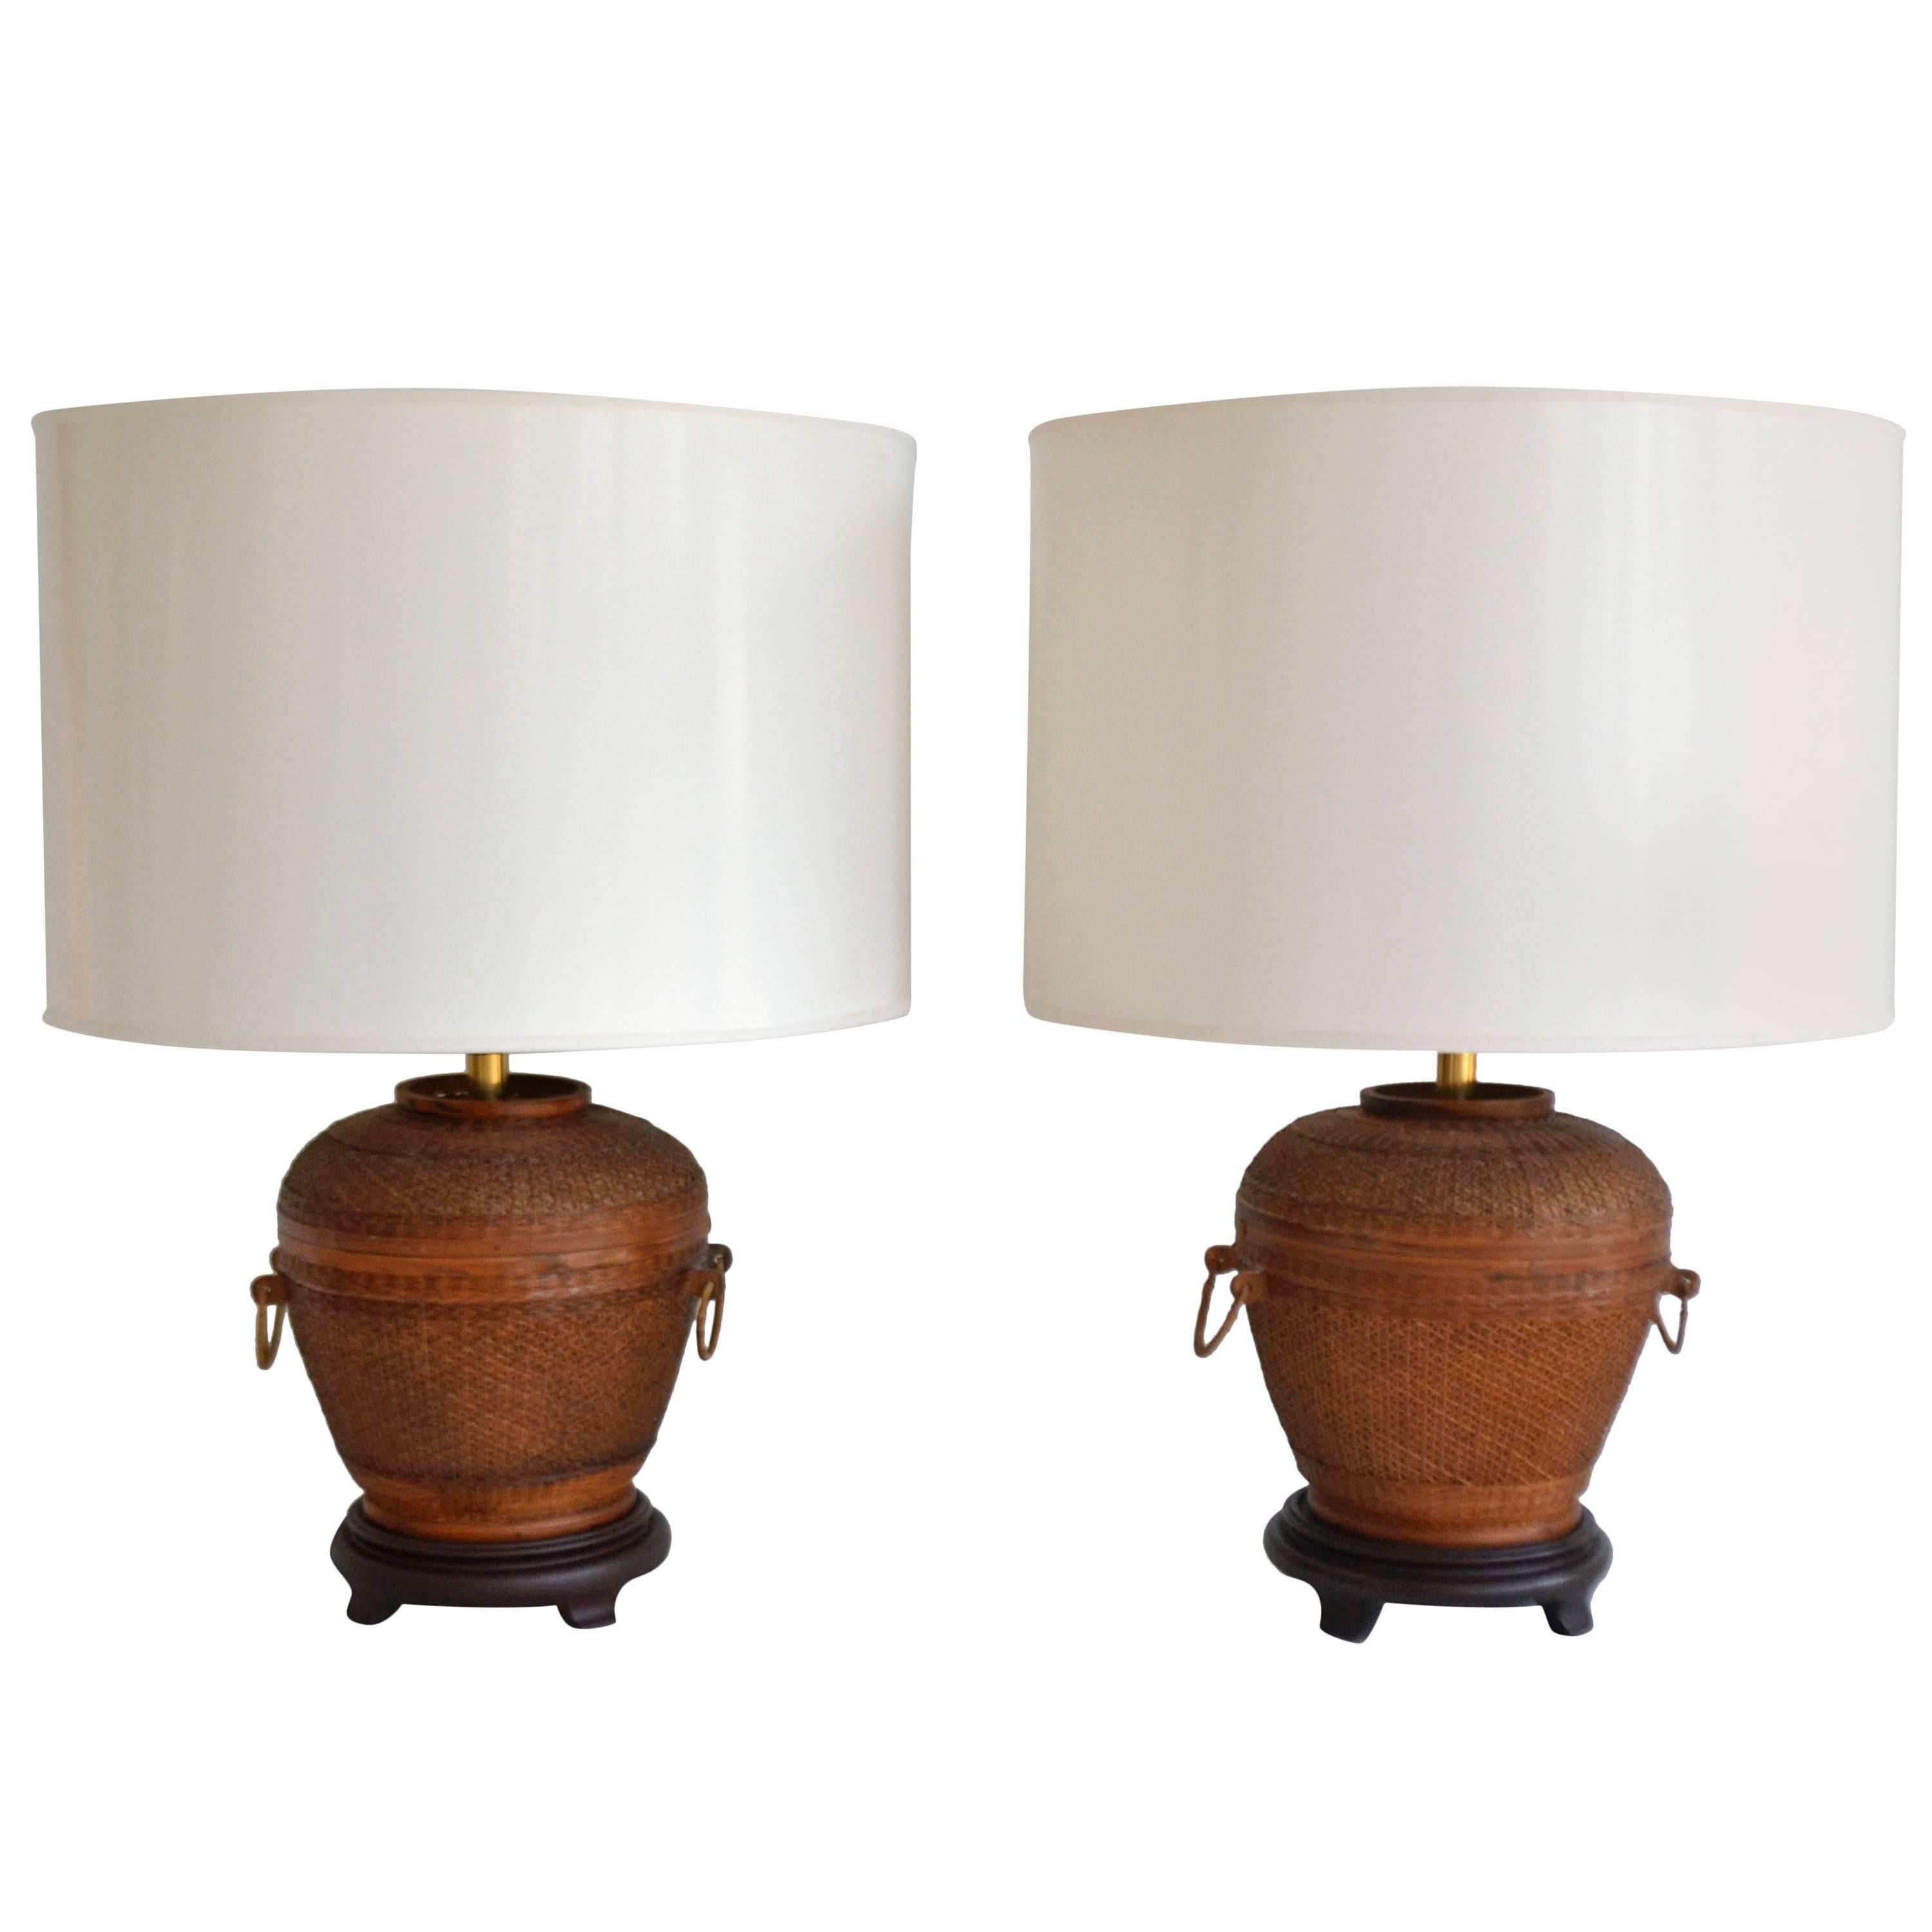 Pair of Mid-Century Woven Reed Basket Form Table Lamps